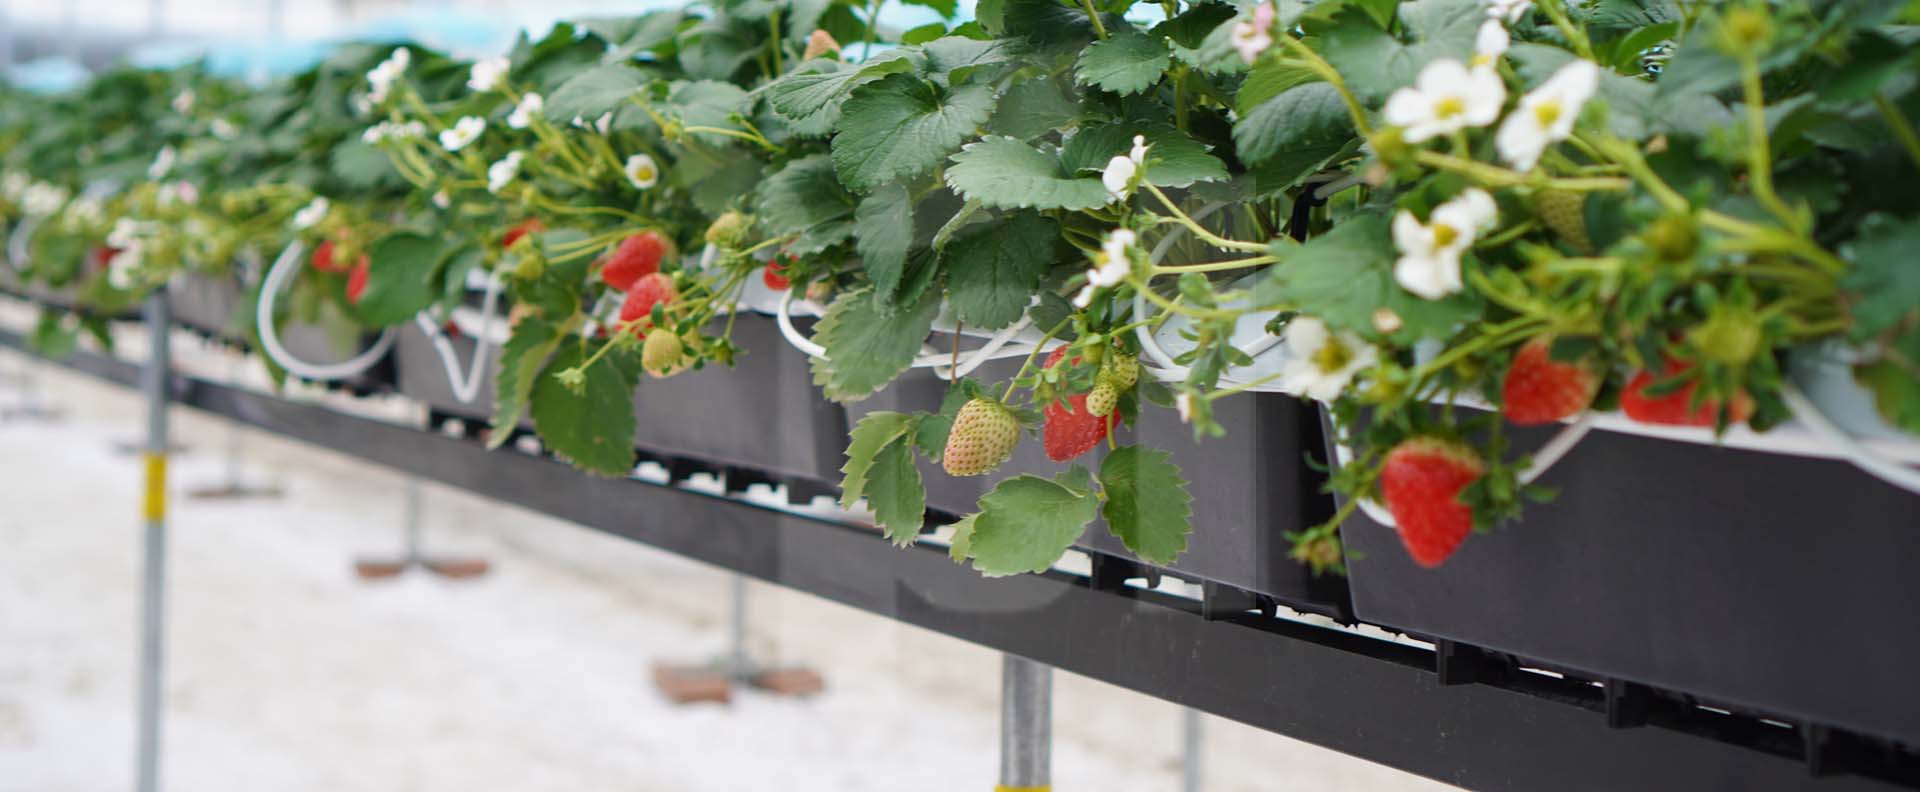 Maximize your strawberry production with Plantlogic´s tabletop  growing systems